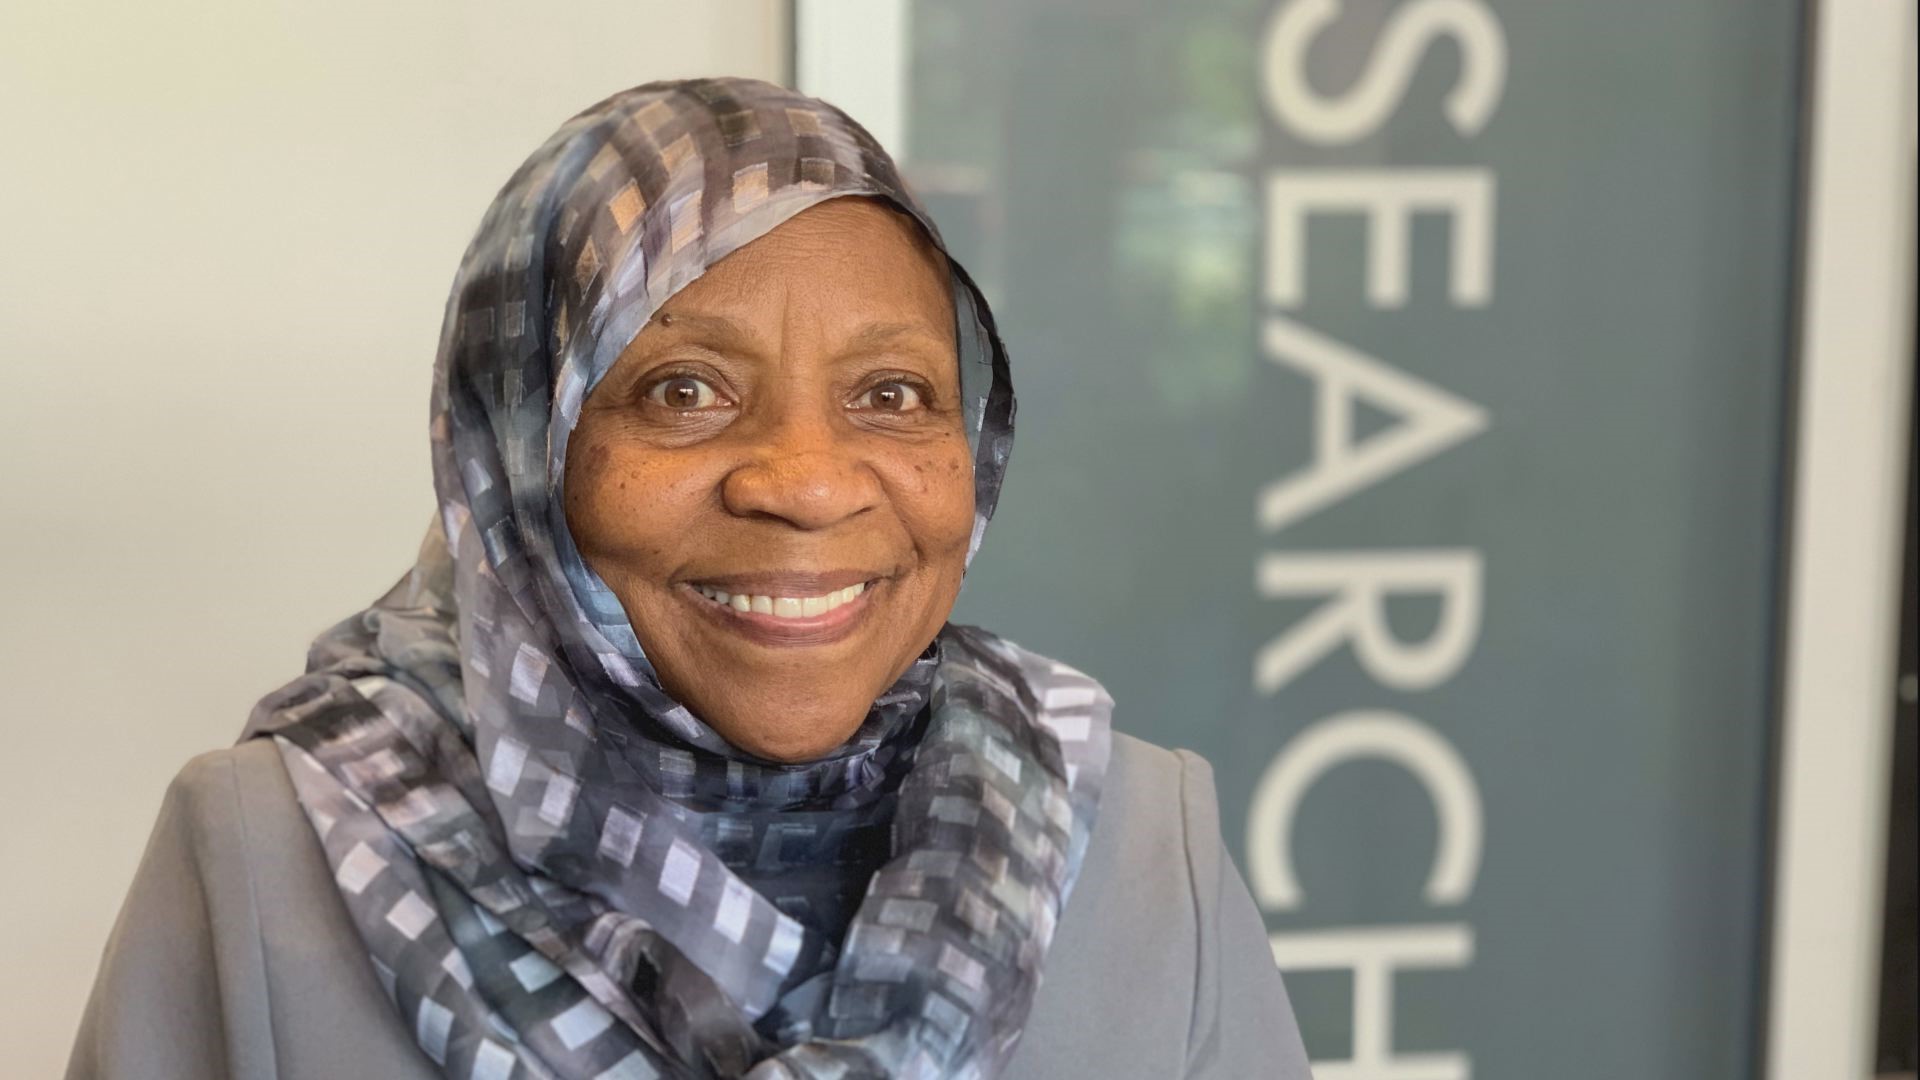 “My ancestors were enslaved. They struggled. They tried to — every generation tried to make something of themselves and tried to make it a little better for the next generation. I see myself as a part of that legacy,” Dr. Fatima Jackson said.